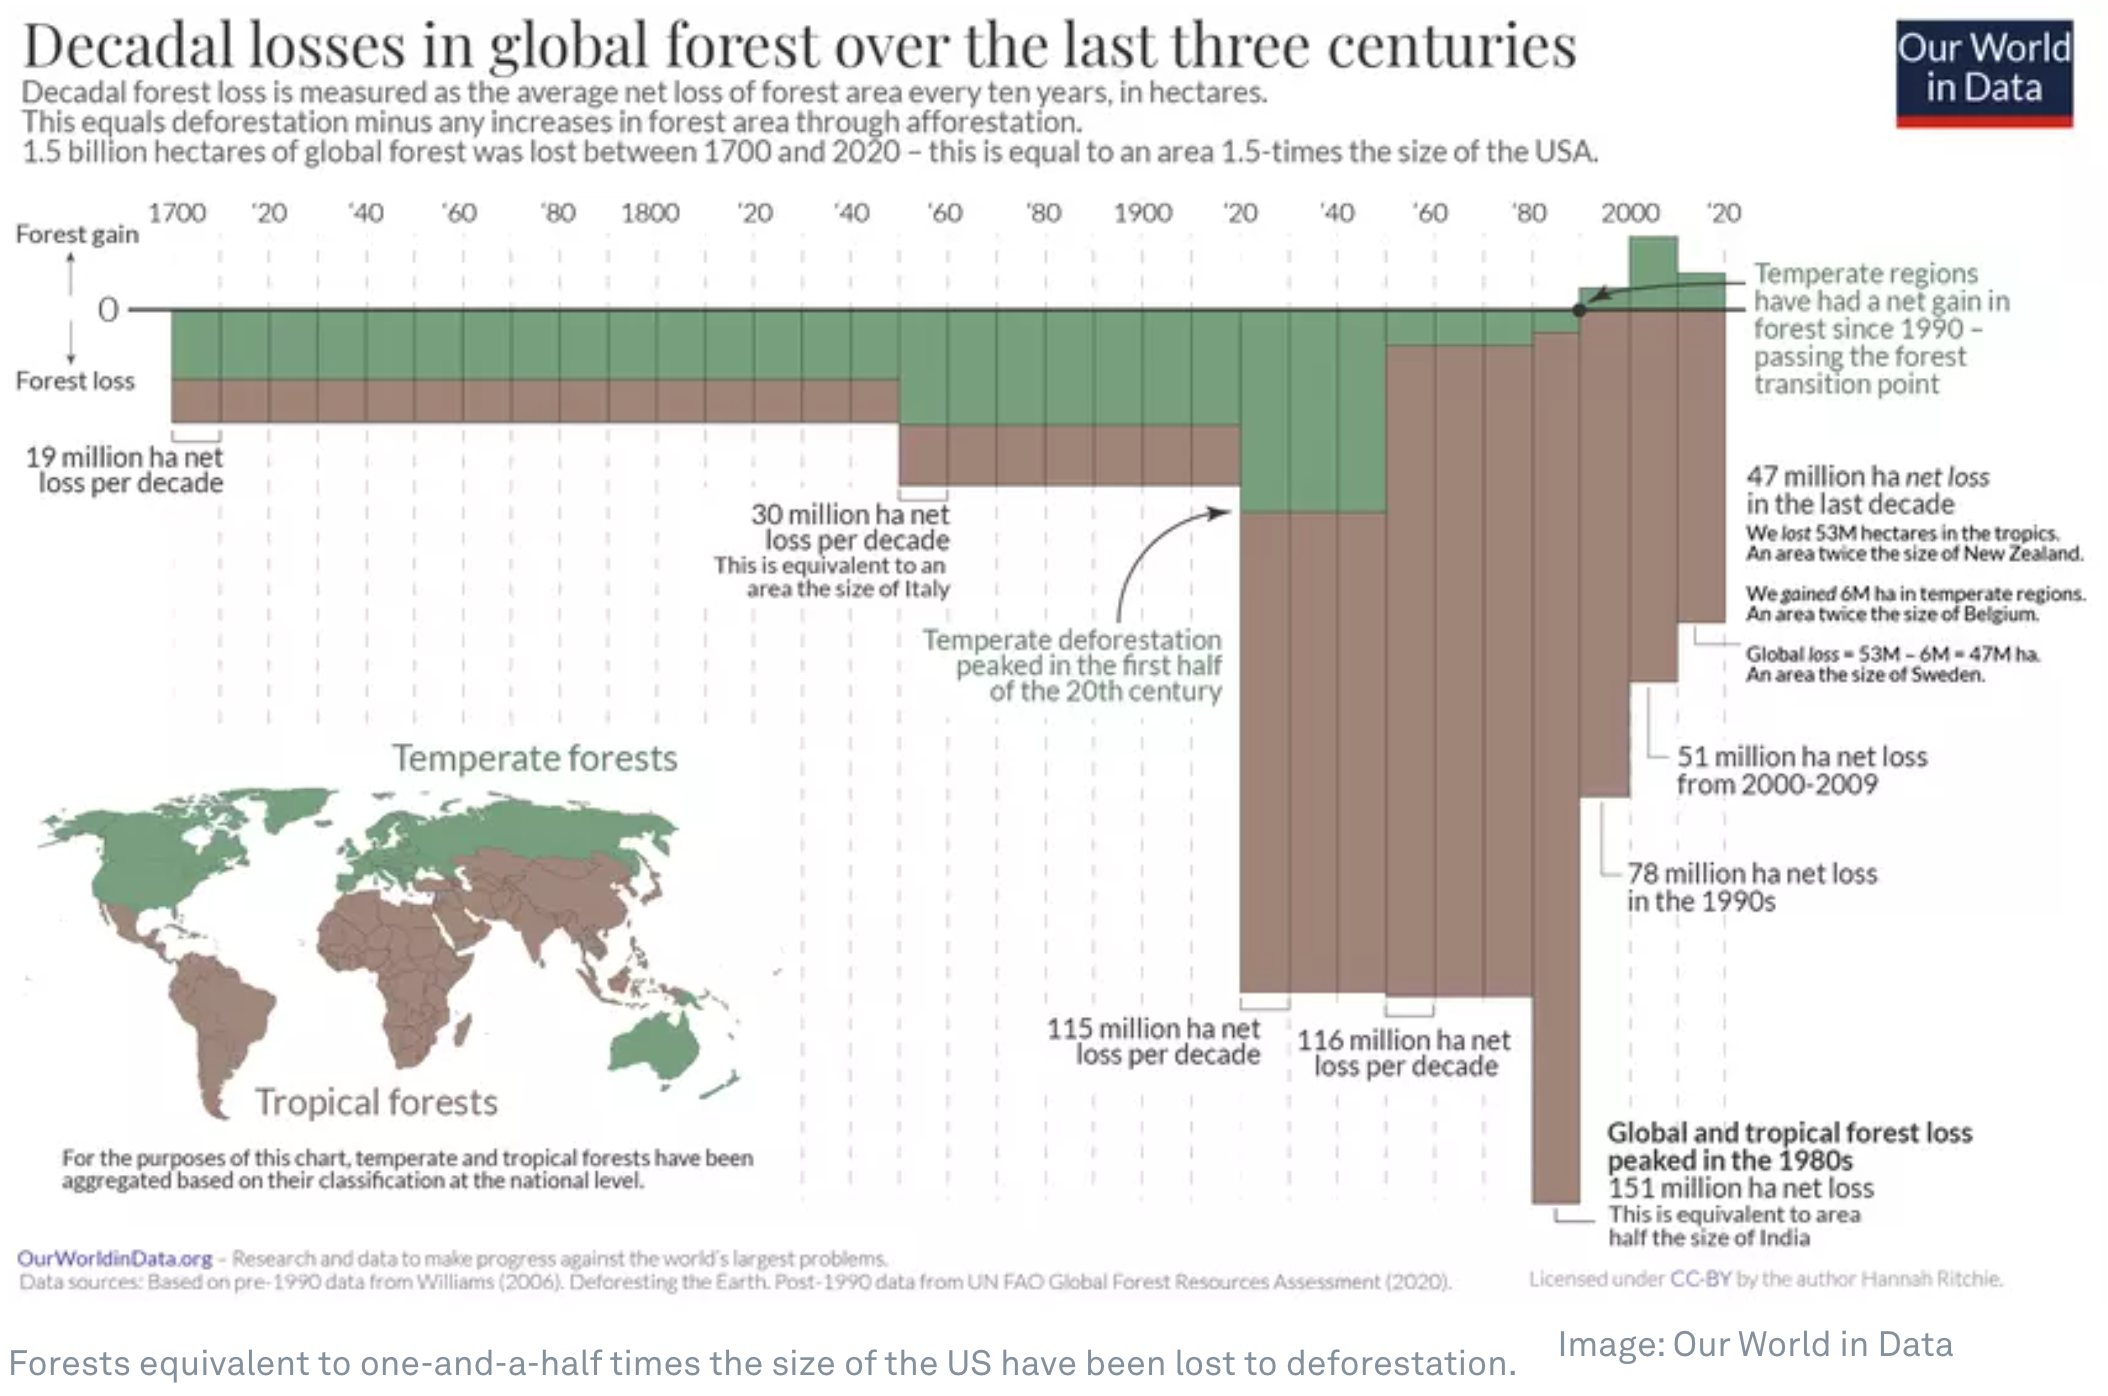 Decadal forest losses (Source: Our World in Data)